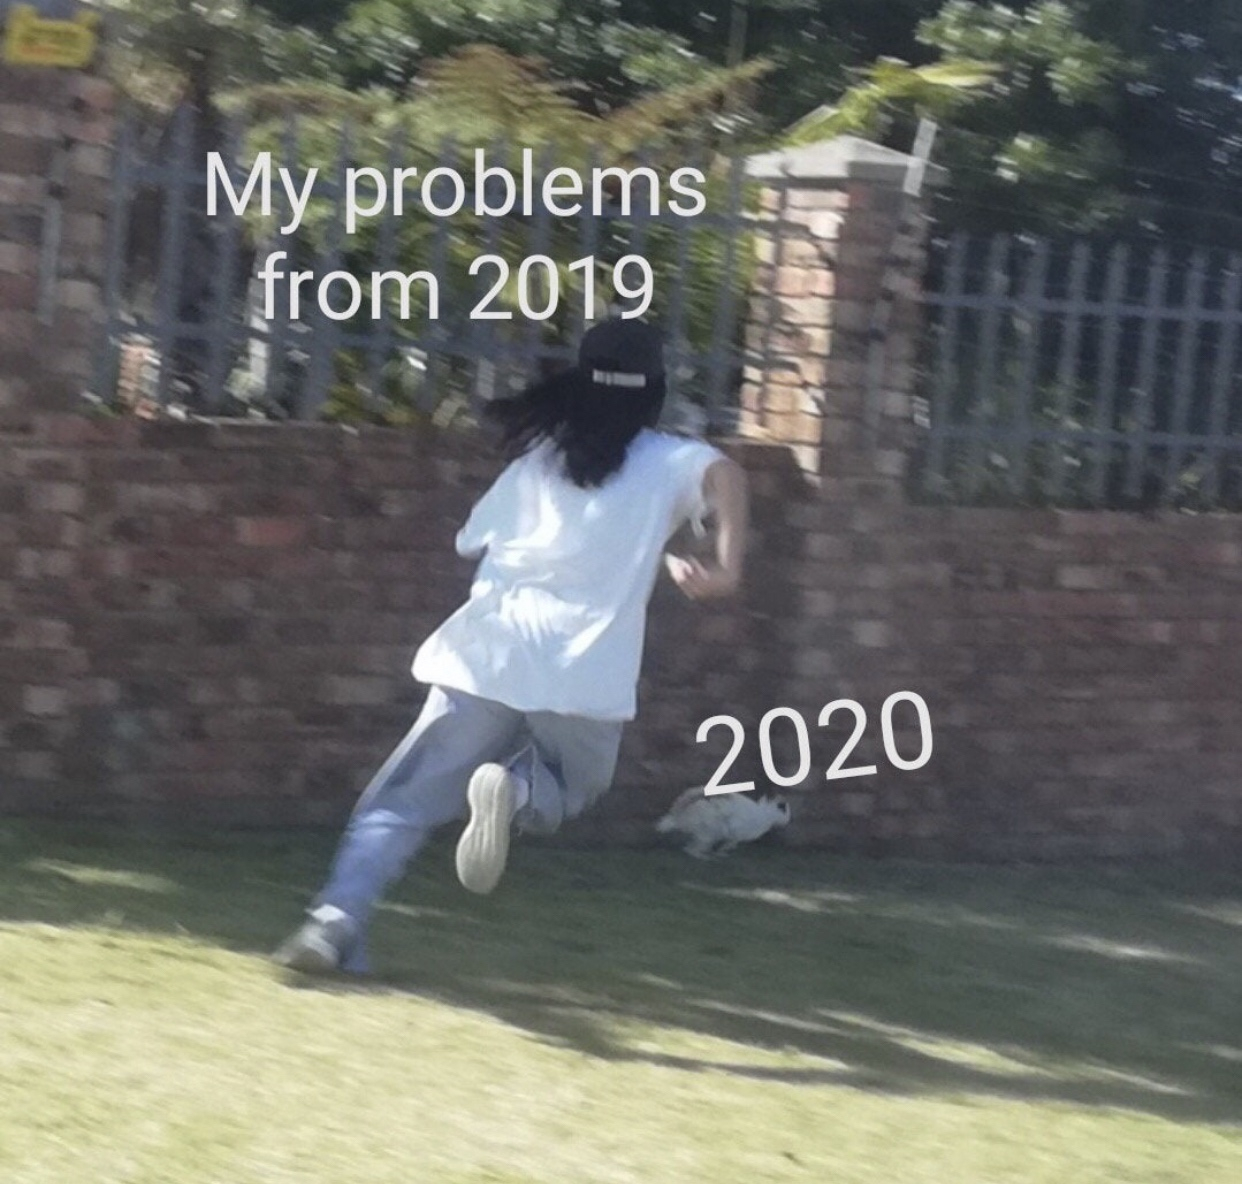 2020 memes - grass - My problems from 2019 2020